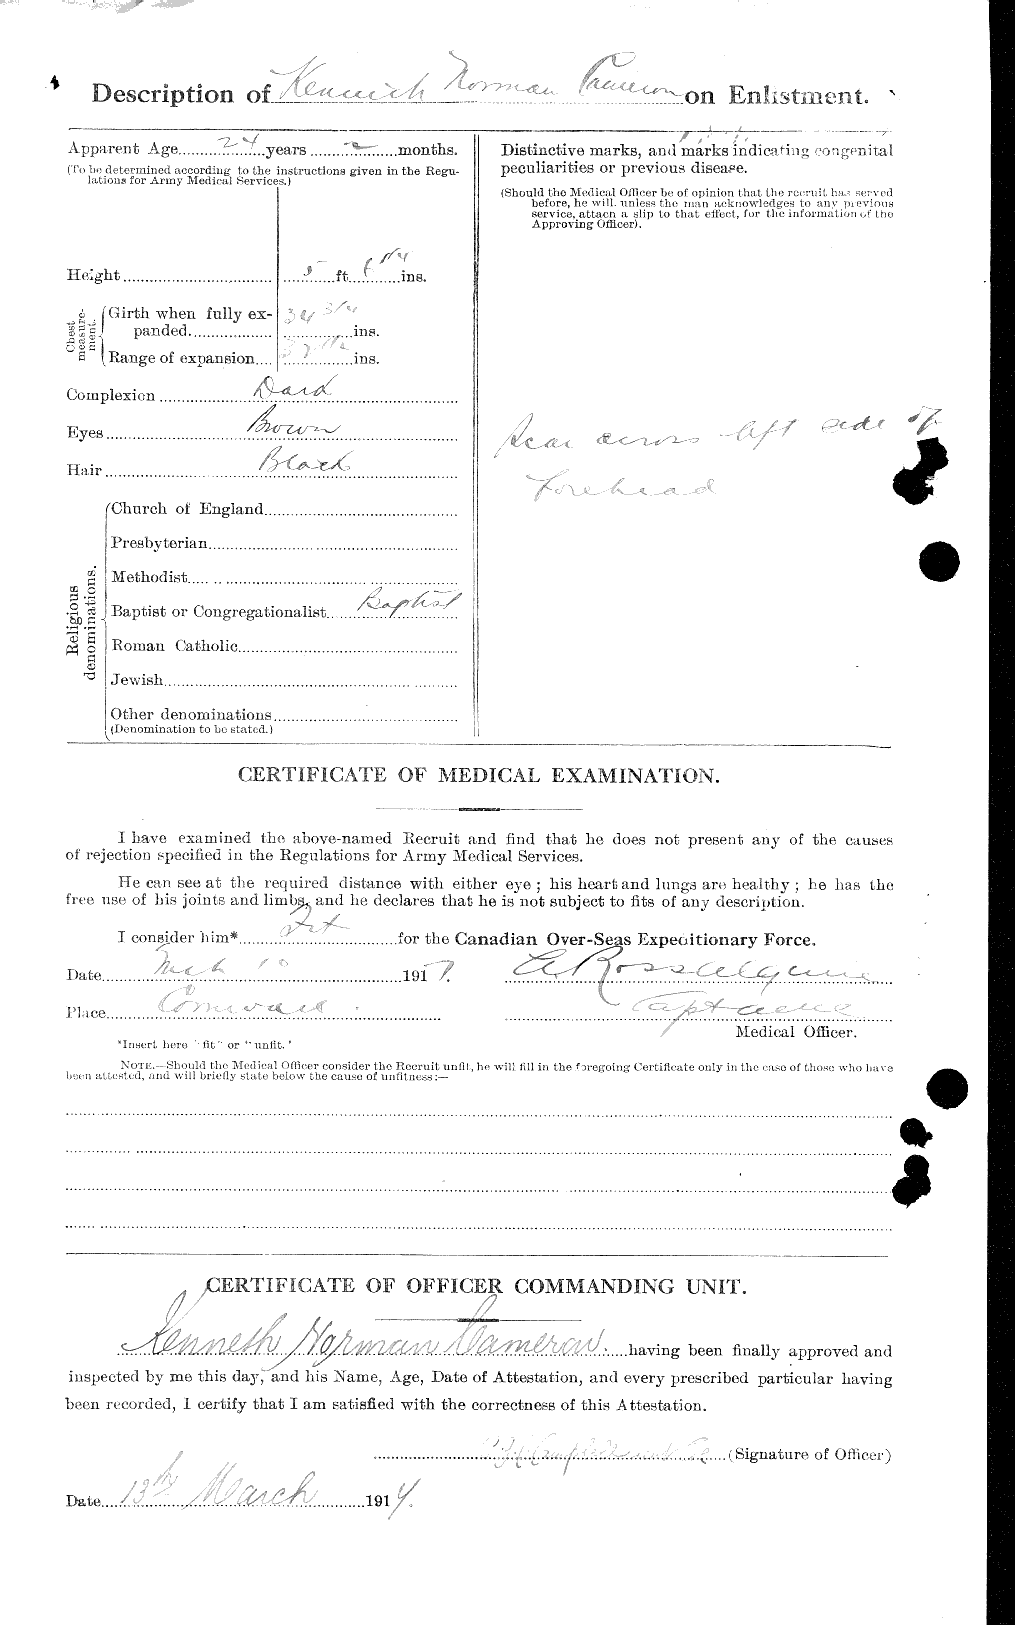 Personnel Records of the First World War - CEF 002377b